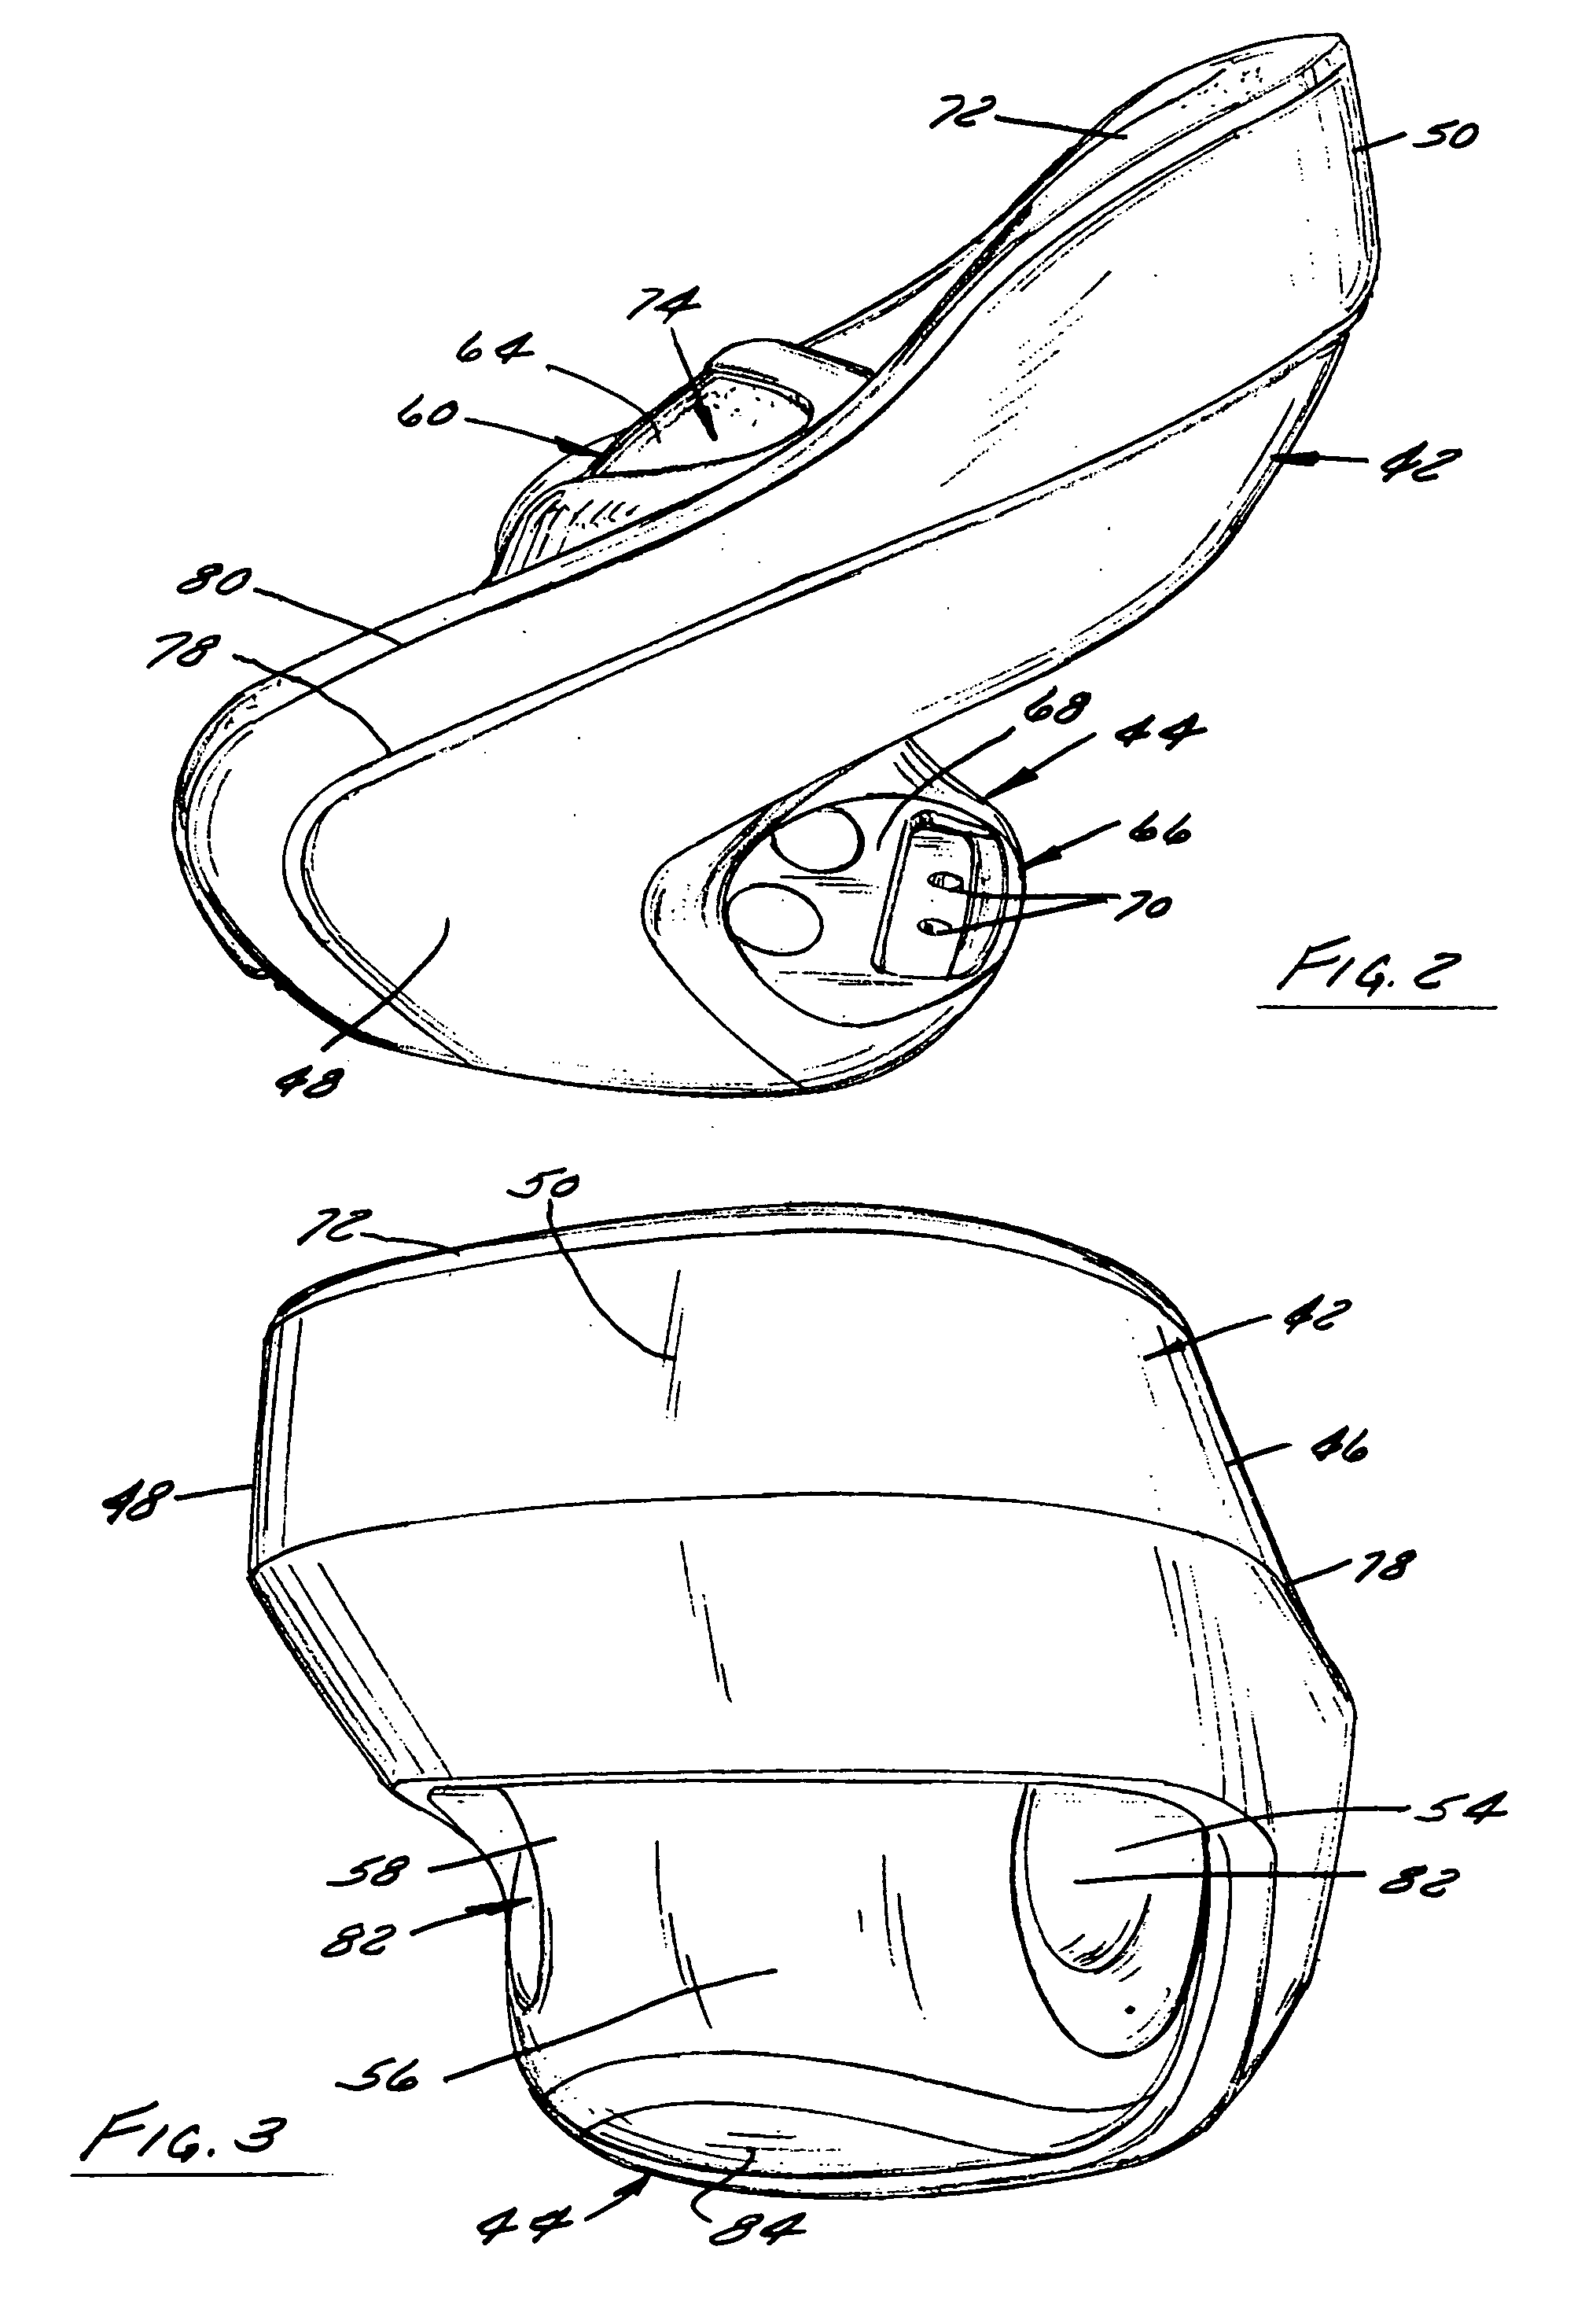 Seat, suspension, bolster and shell